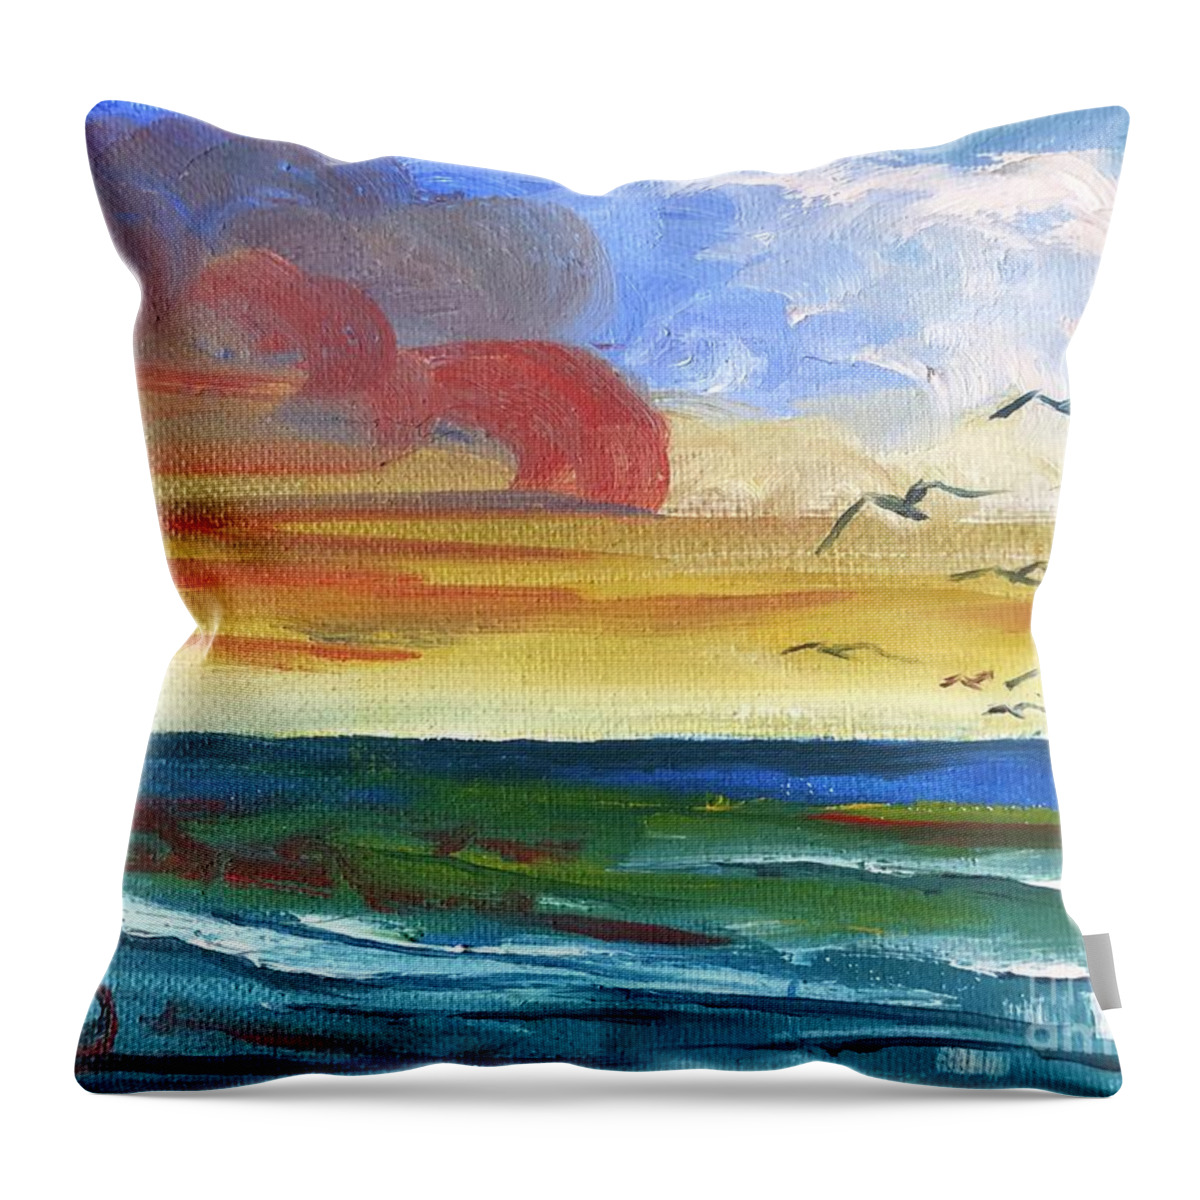 Seascape Throw Pillow featuring the painting Sunrise Sunset by Catherine Ludwig Donleycott